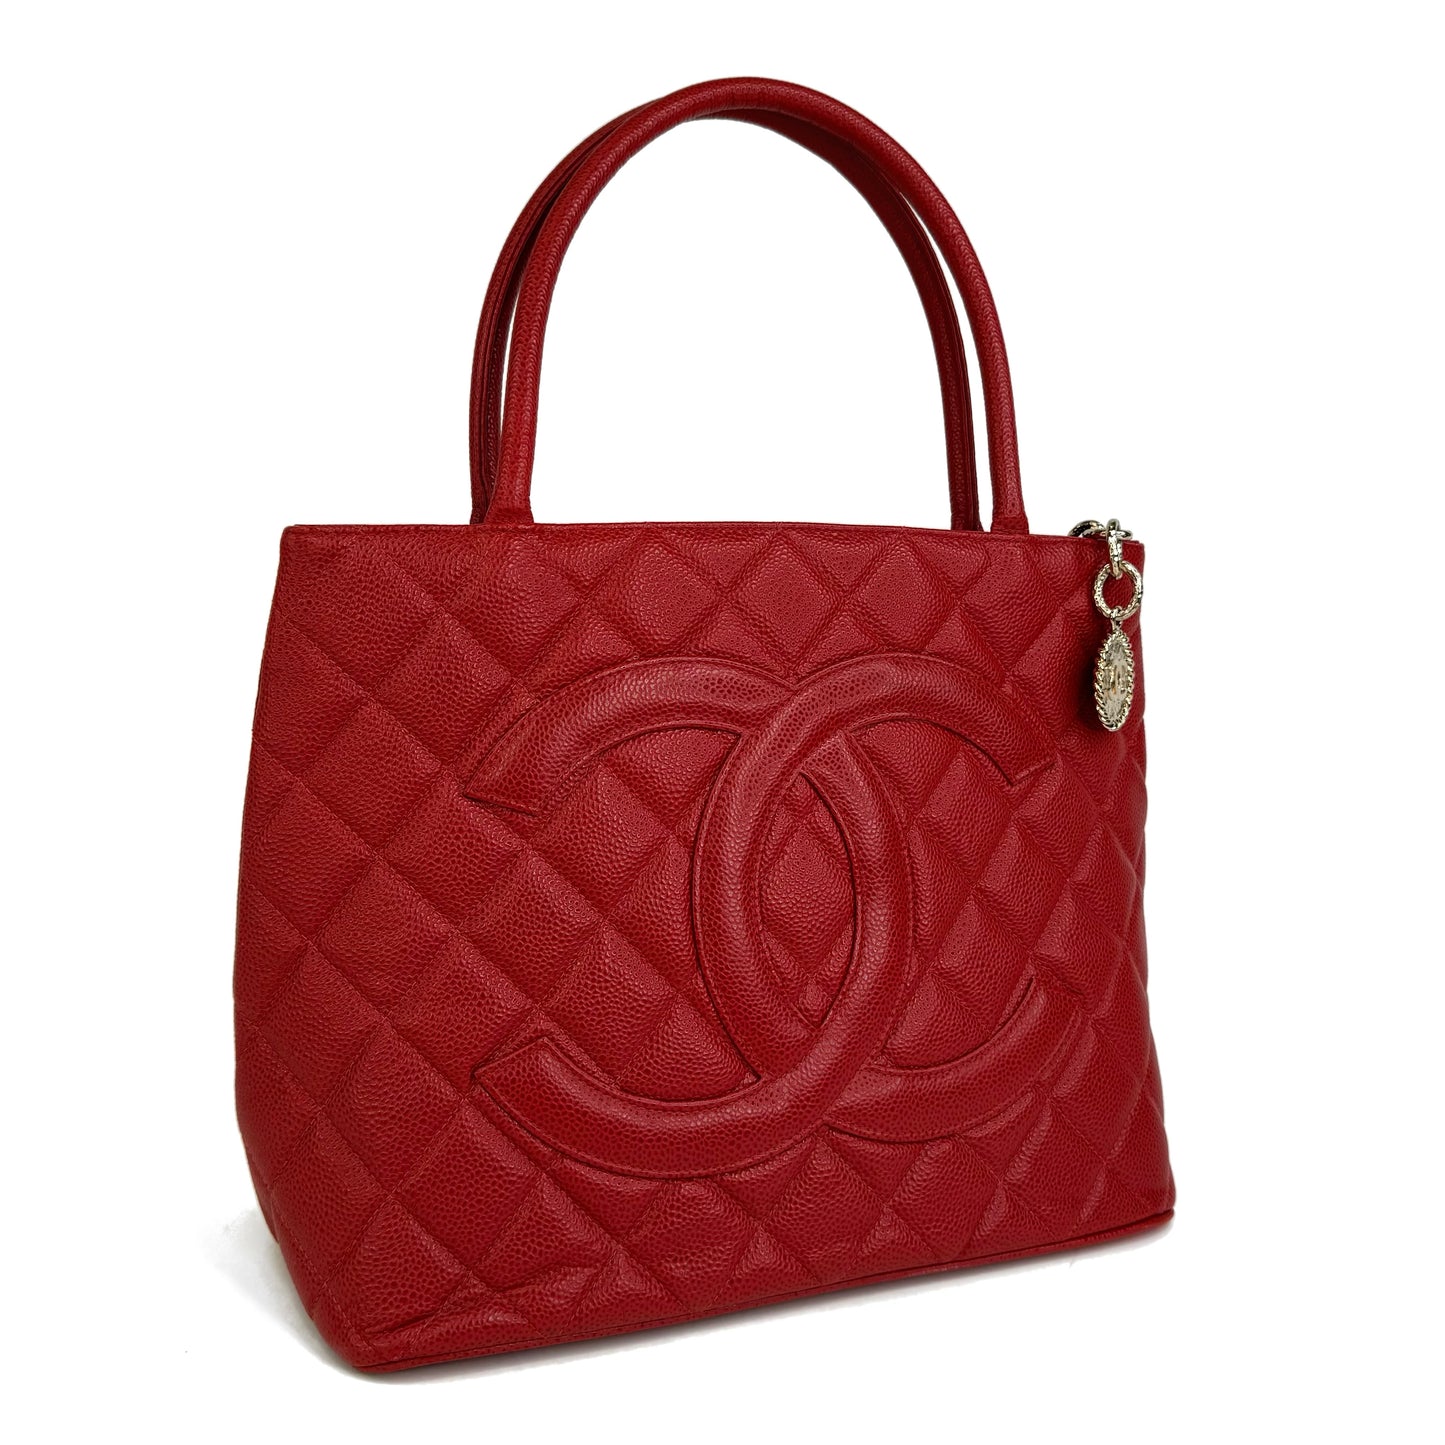 Chanel Medallion Red Tote Bag